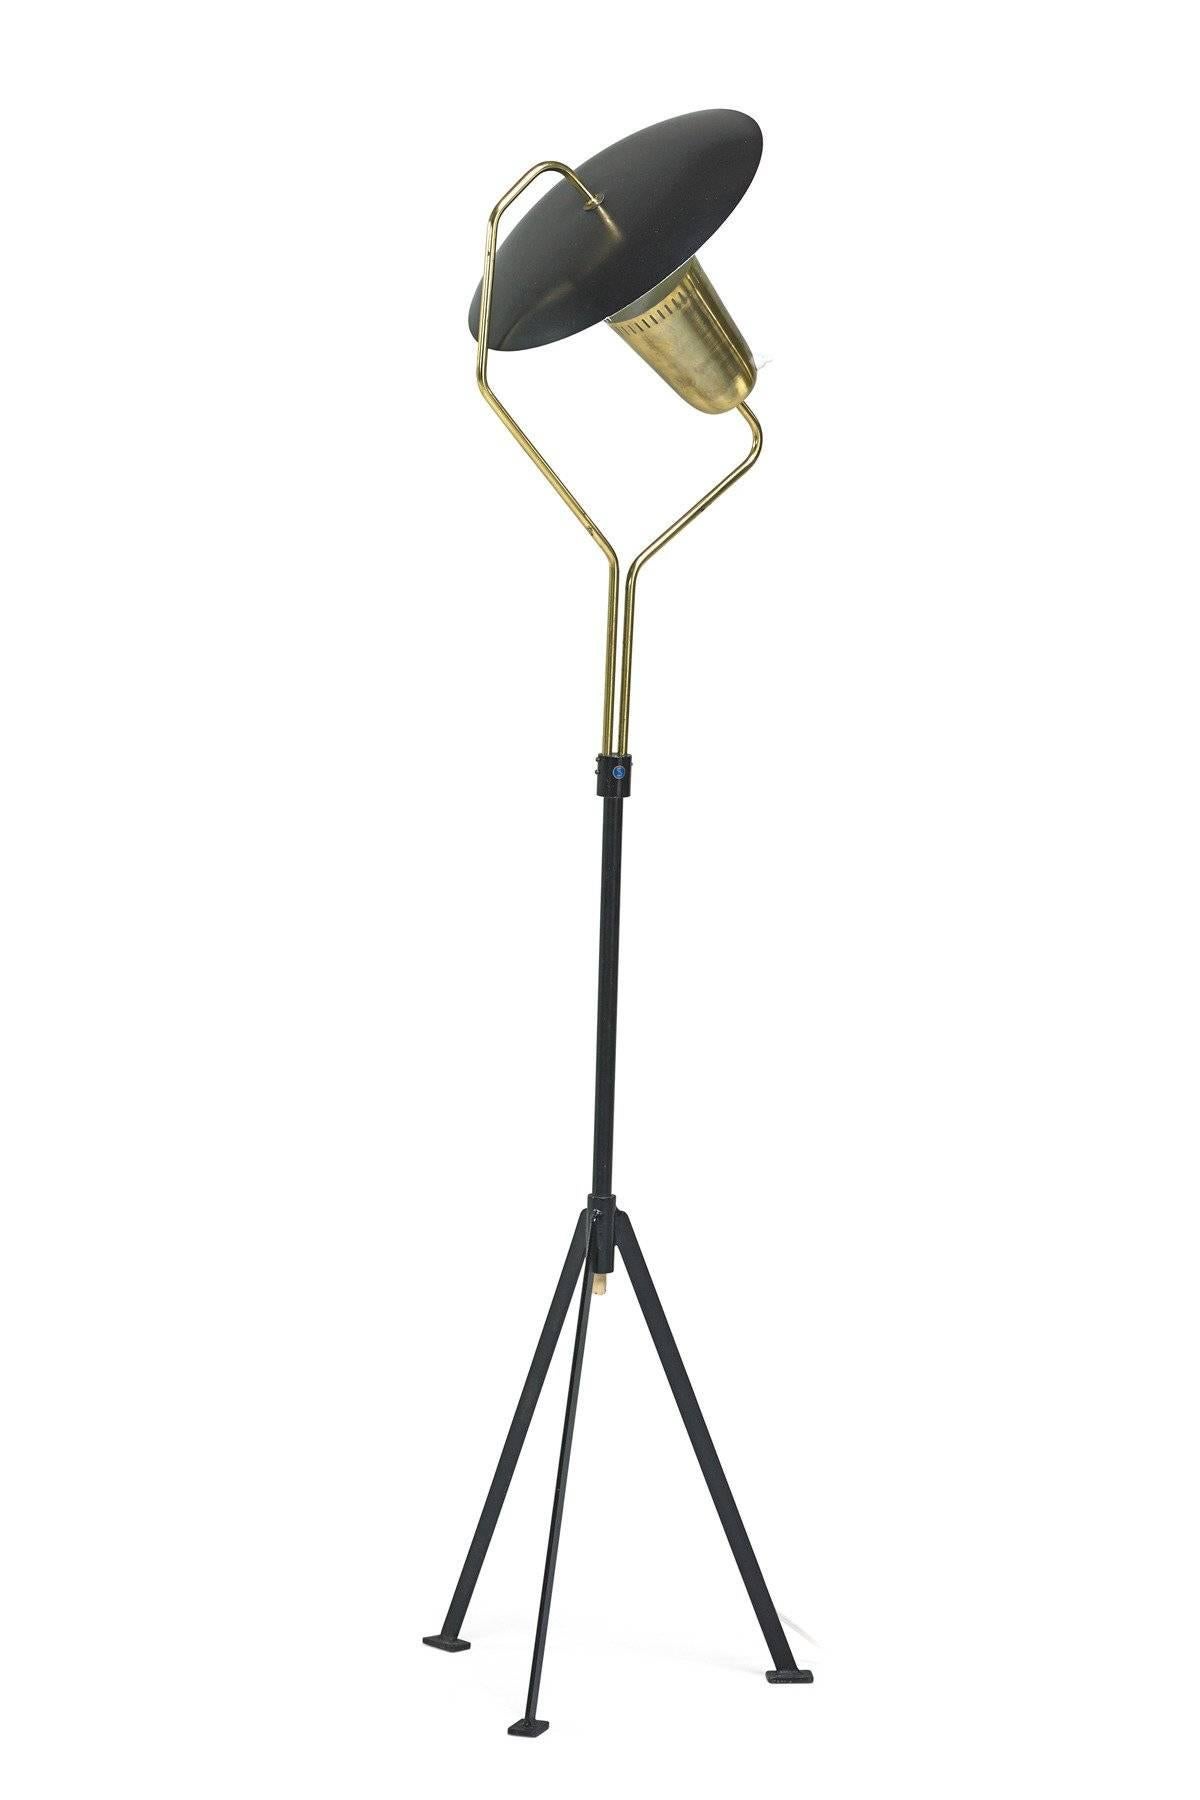 Scandinavian modern floor lamp; convex reflector- a rare form, Sweden, 1960; enameled metal, brass, manufacturer label.

Similar is style to the grasshopper G33 floor lamp designed by Greta Magnusson Grossman, who worked with the manufacturer,